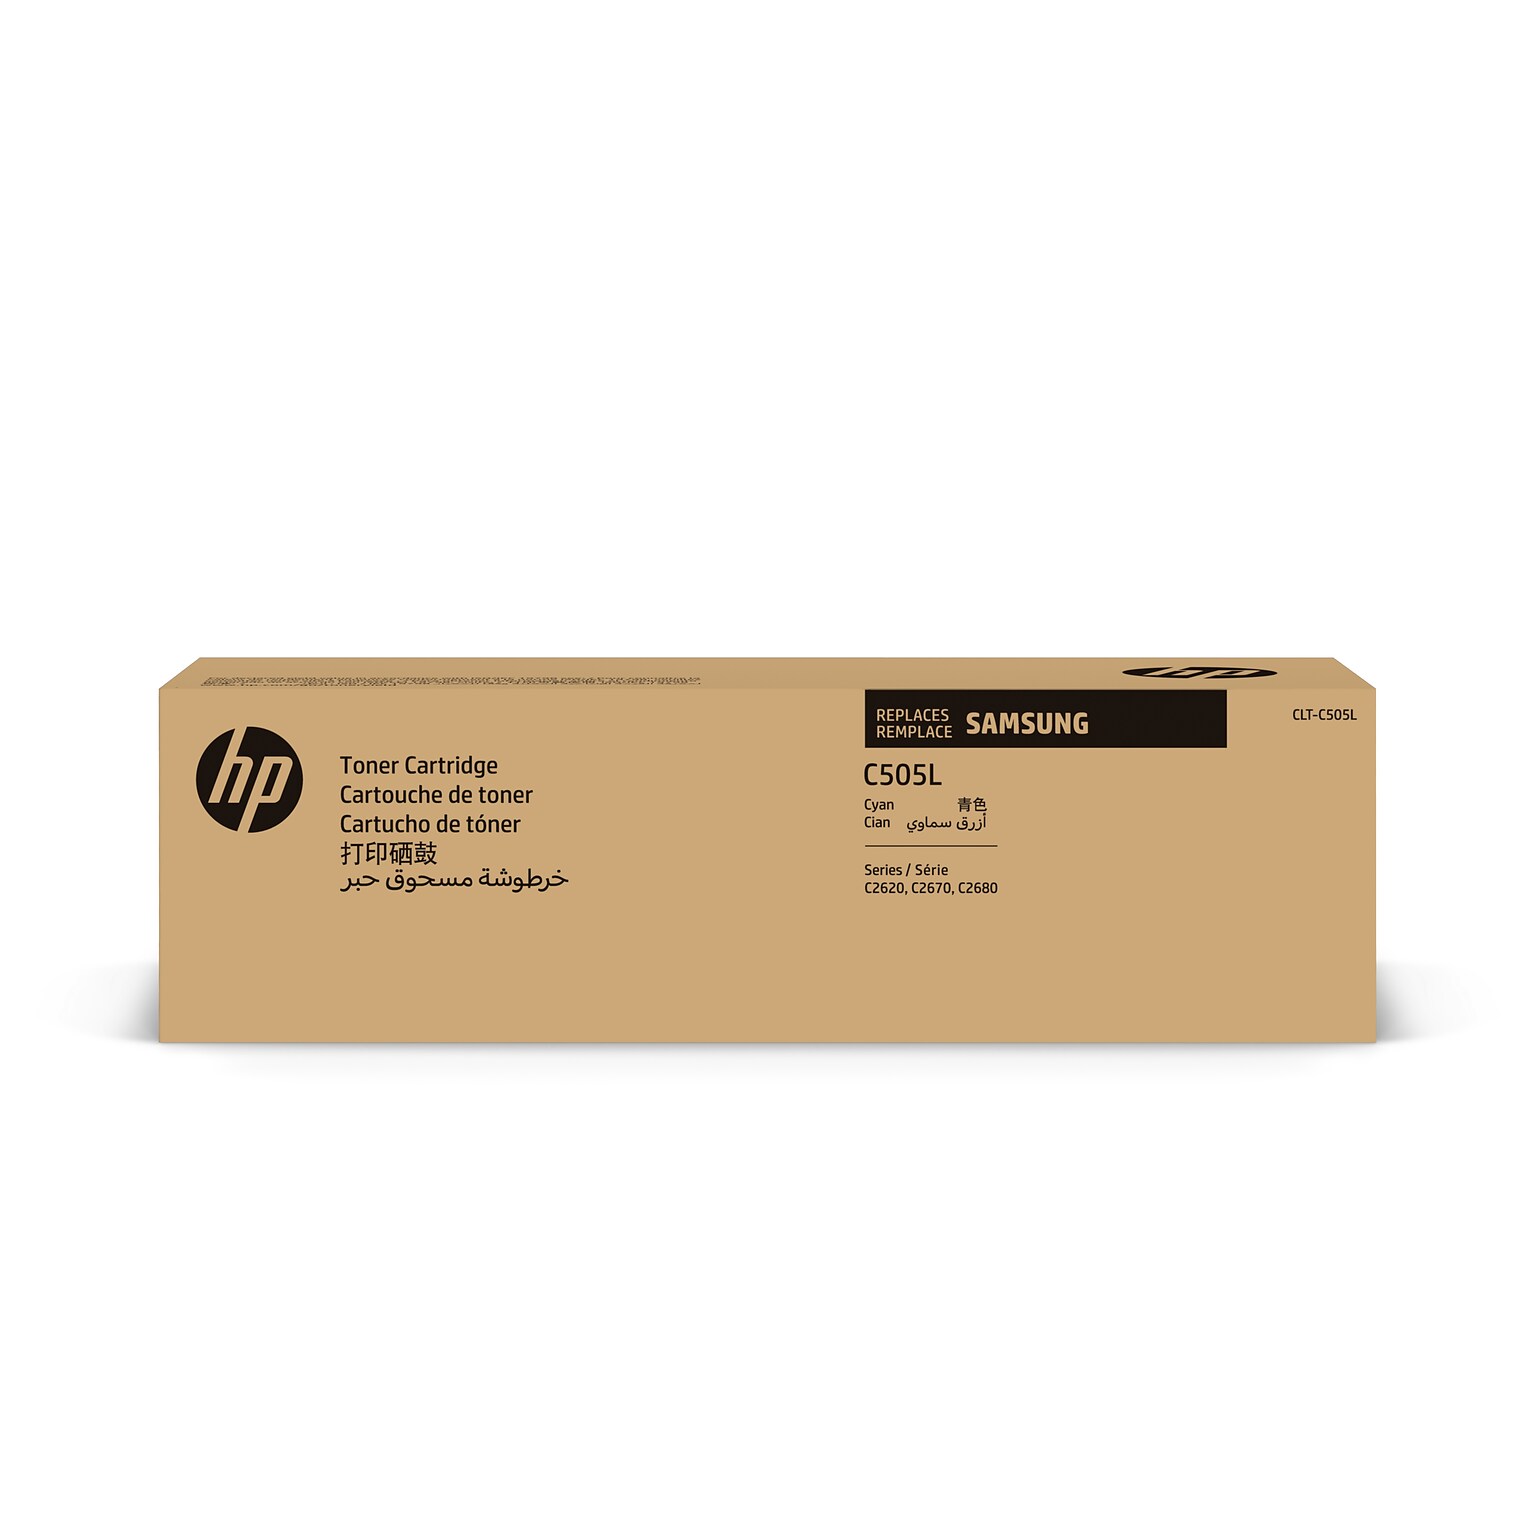 HP C505L Cyan Toner Cartridge for Samsung CLT-C505L (SU035), Samsung-branded printer supplies are now HP-branded